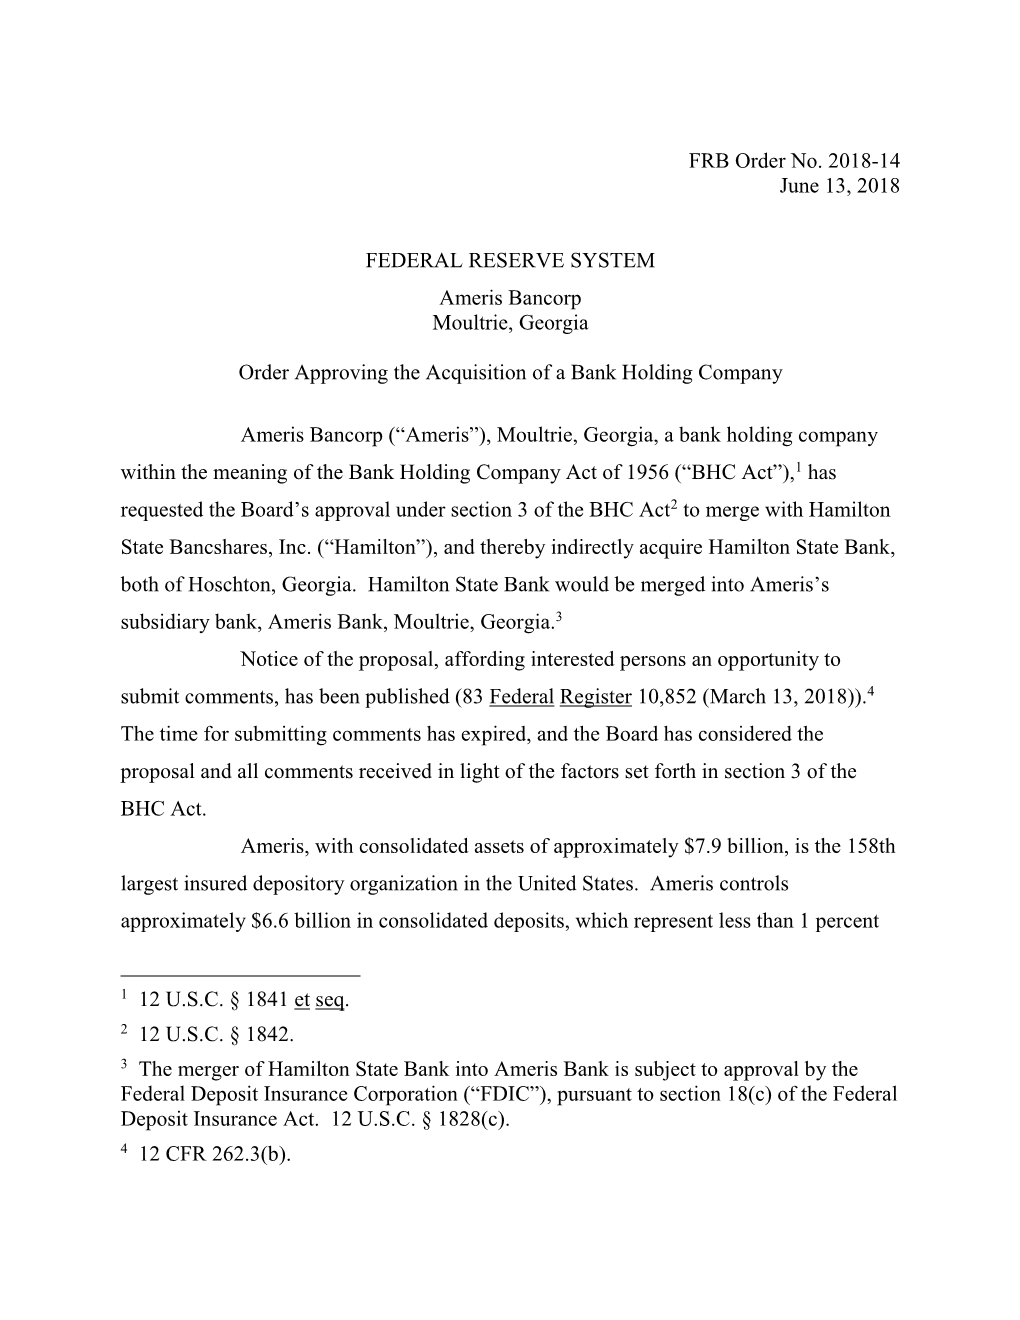 Order Approving the Acquisition of a Bank Holding Company